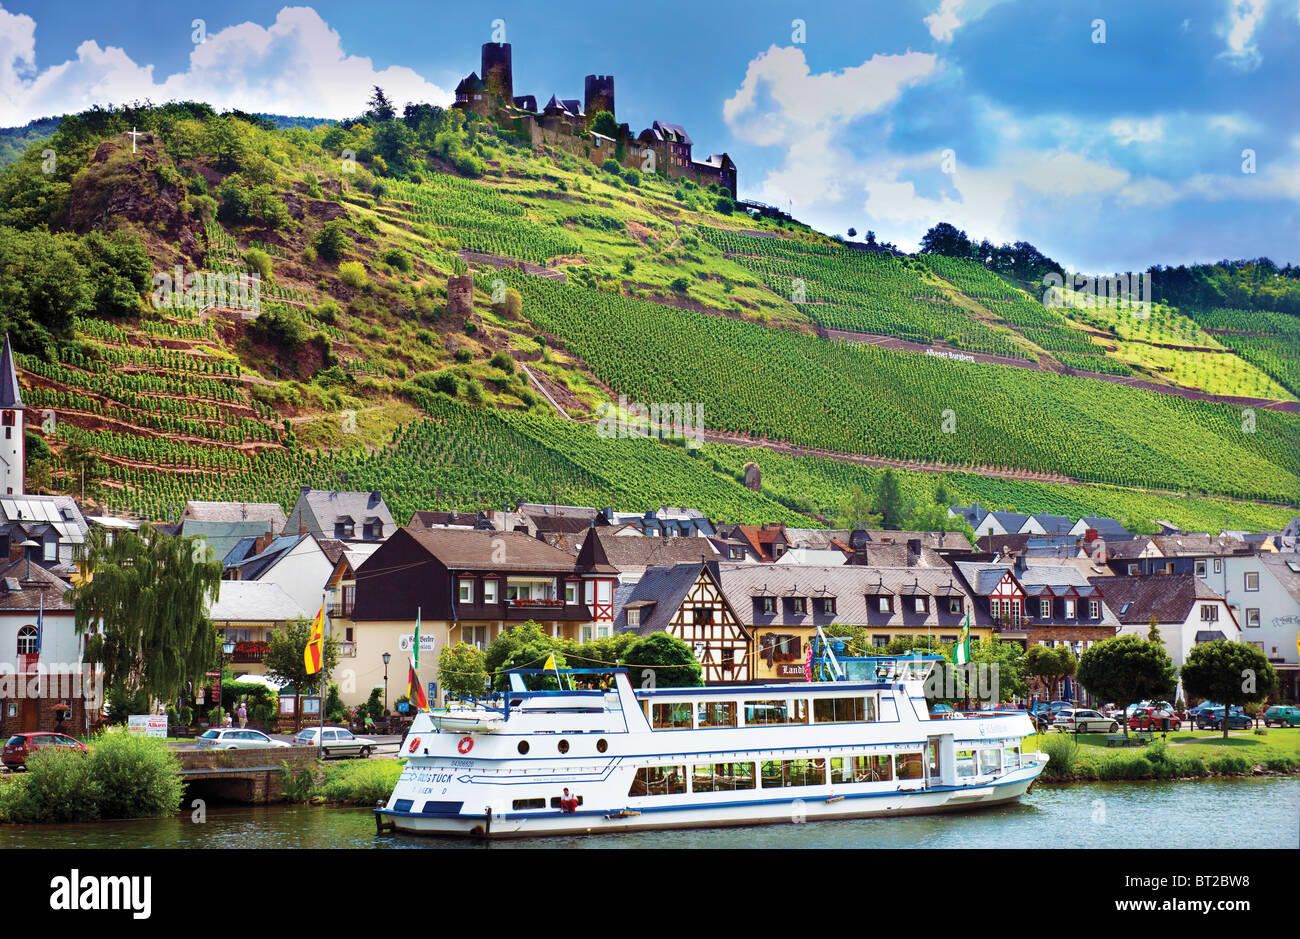 Moselle river valley.Cruise ship, Thurant Castle,vineyards.Alken,Germany. Stock Photo